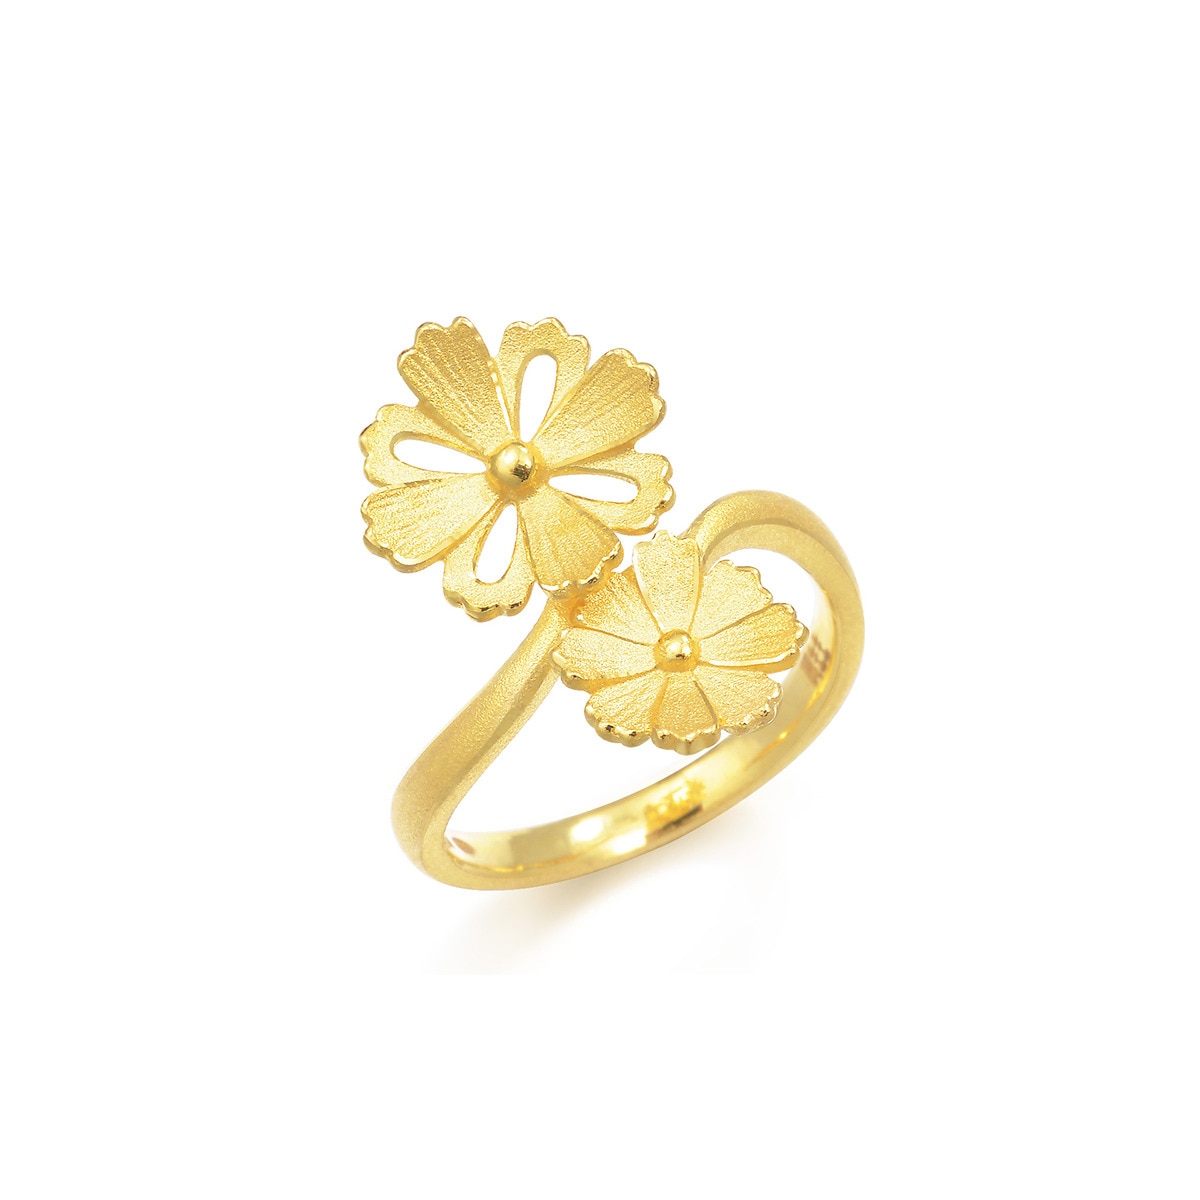 Cultural Blessings 999.9 Gold Ring - 86942R | Chow Sang Sang Jewellery